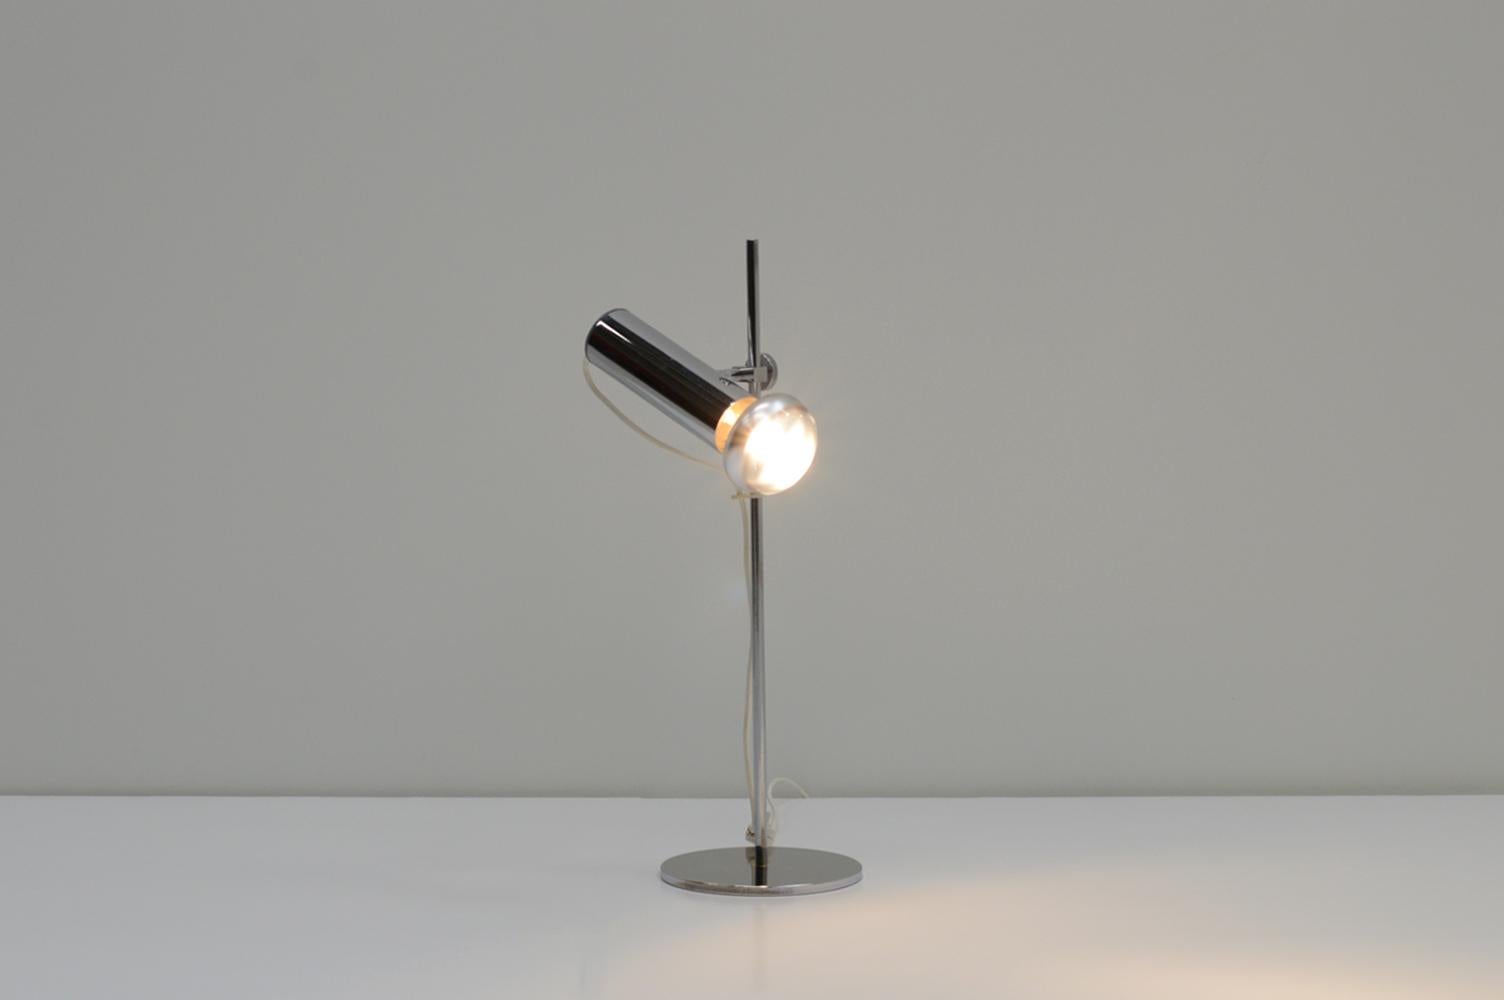 Chrome spot desk lamp, Europe 1970s. High quality lamp. Adjustable in height and the spot can be positioned in all directions. wear on the base plate. In good vintage condition. 

